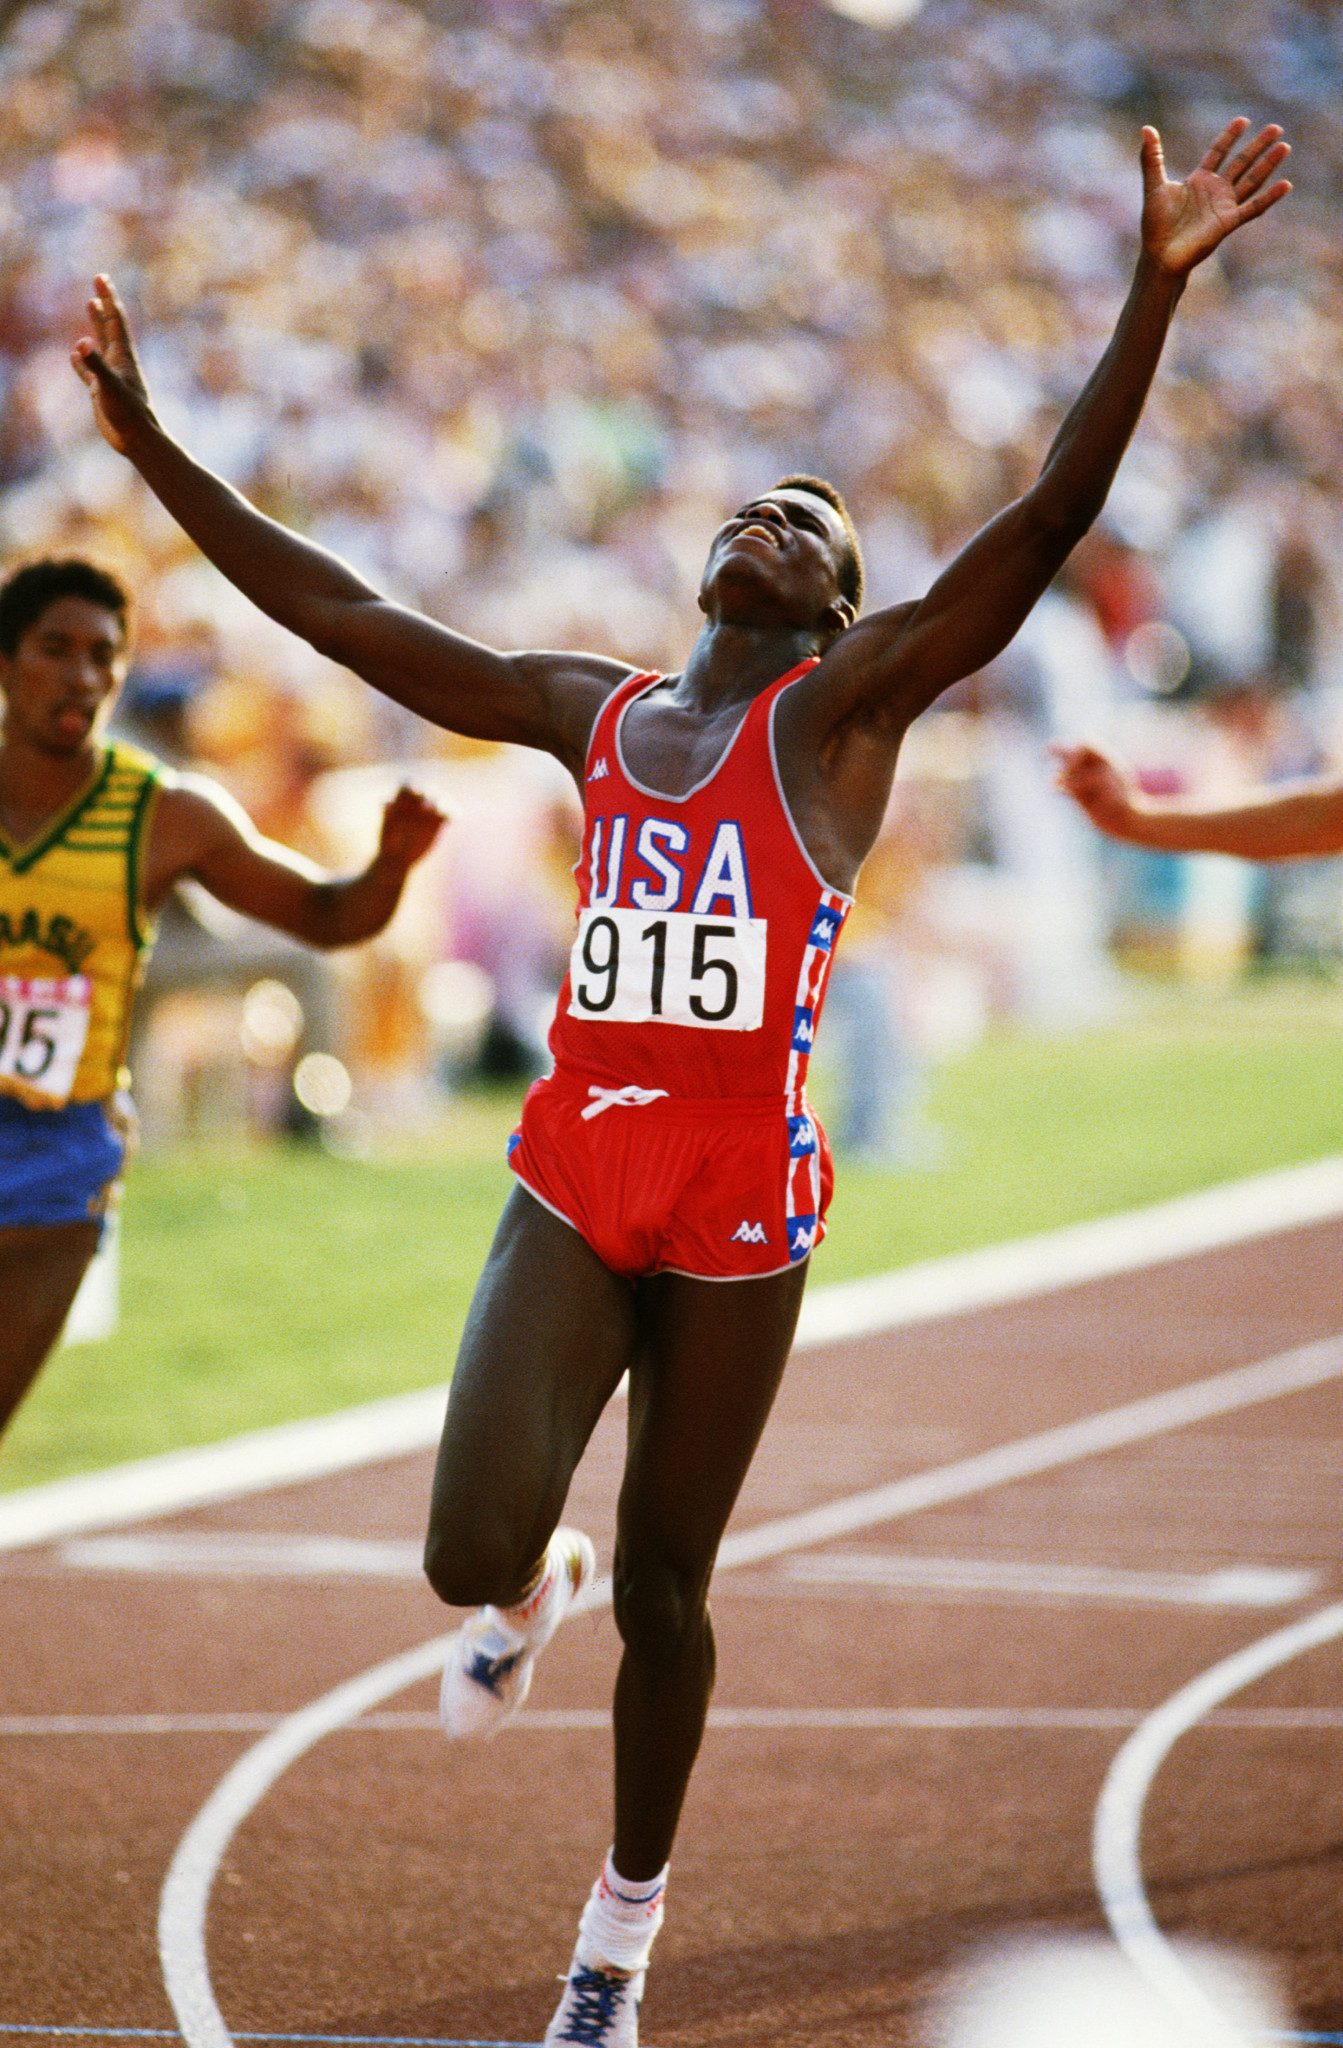 Carl Lewis won four Olympic gold medals at Los Angeles 1984, one of the most historic feats in the history of the sport ©Getty Images